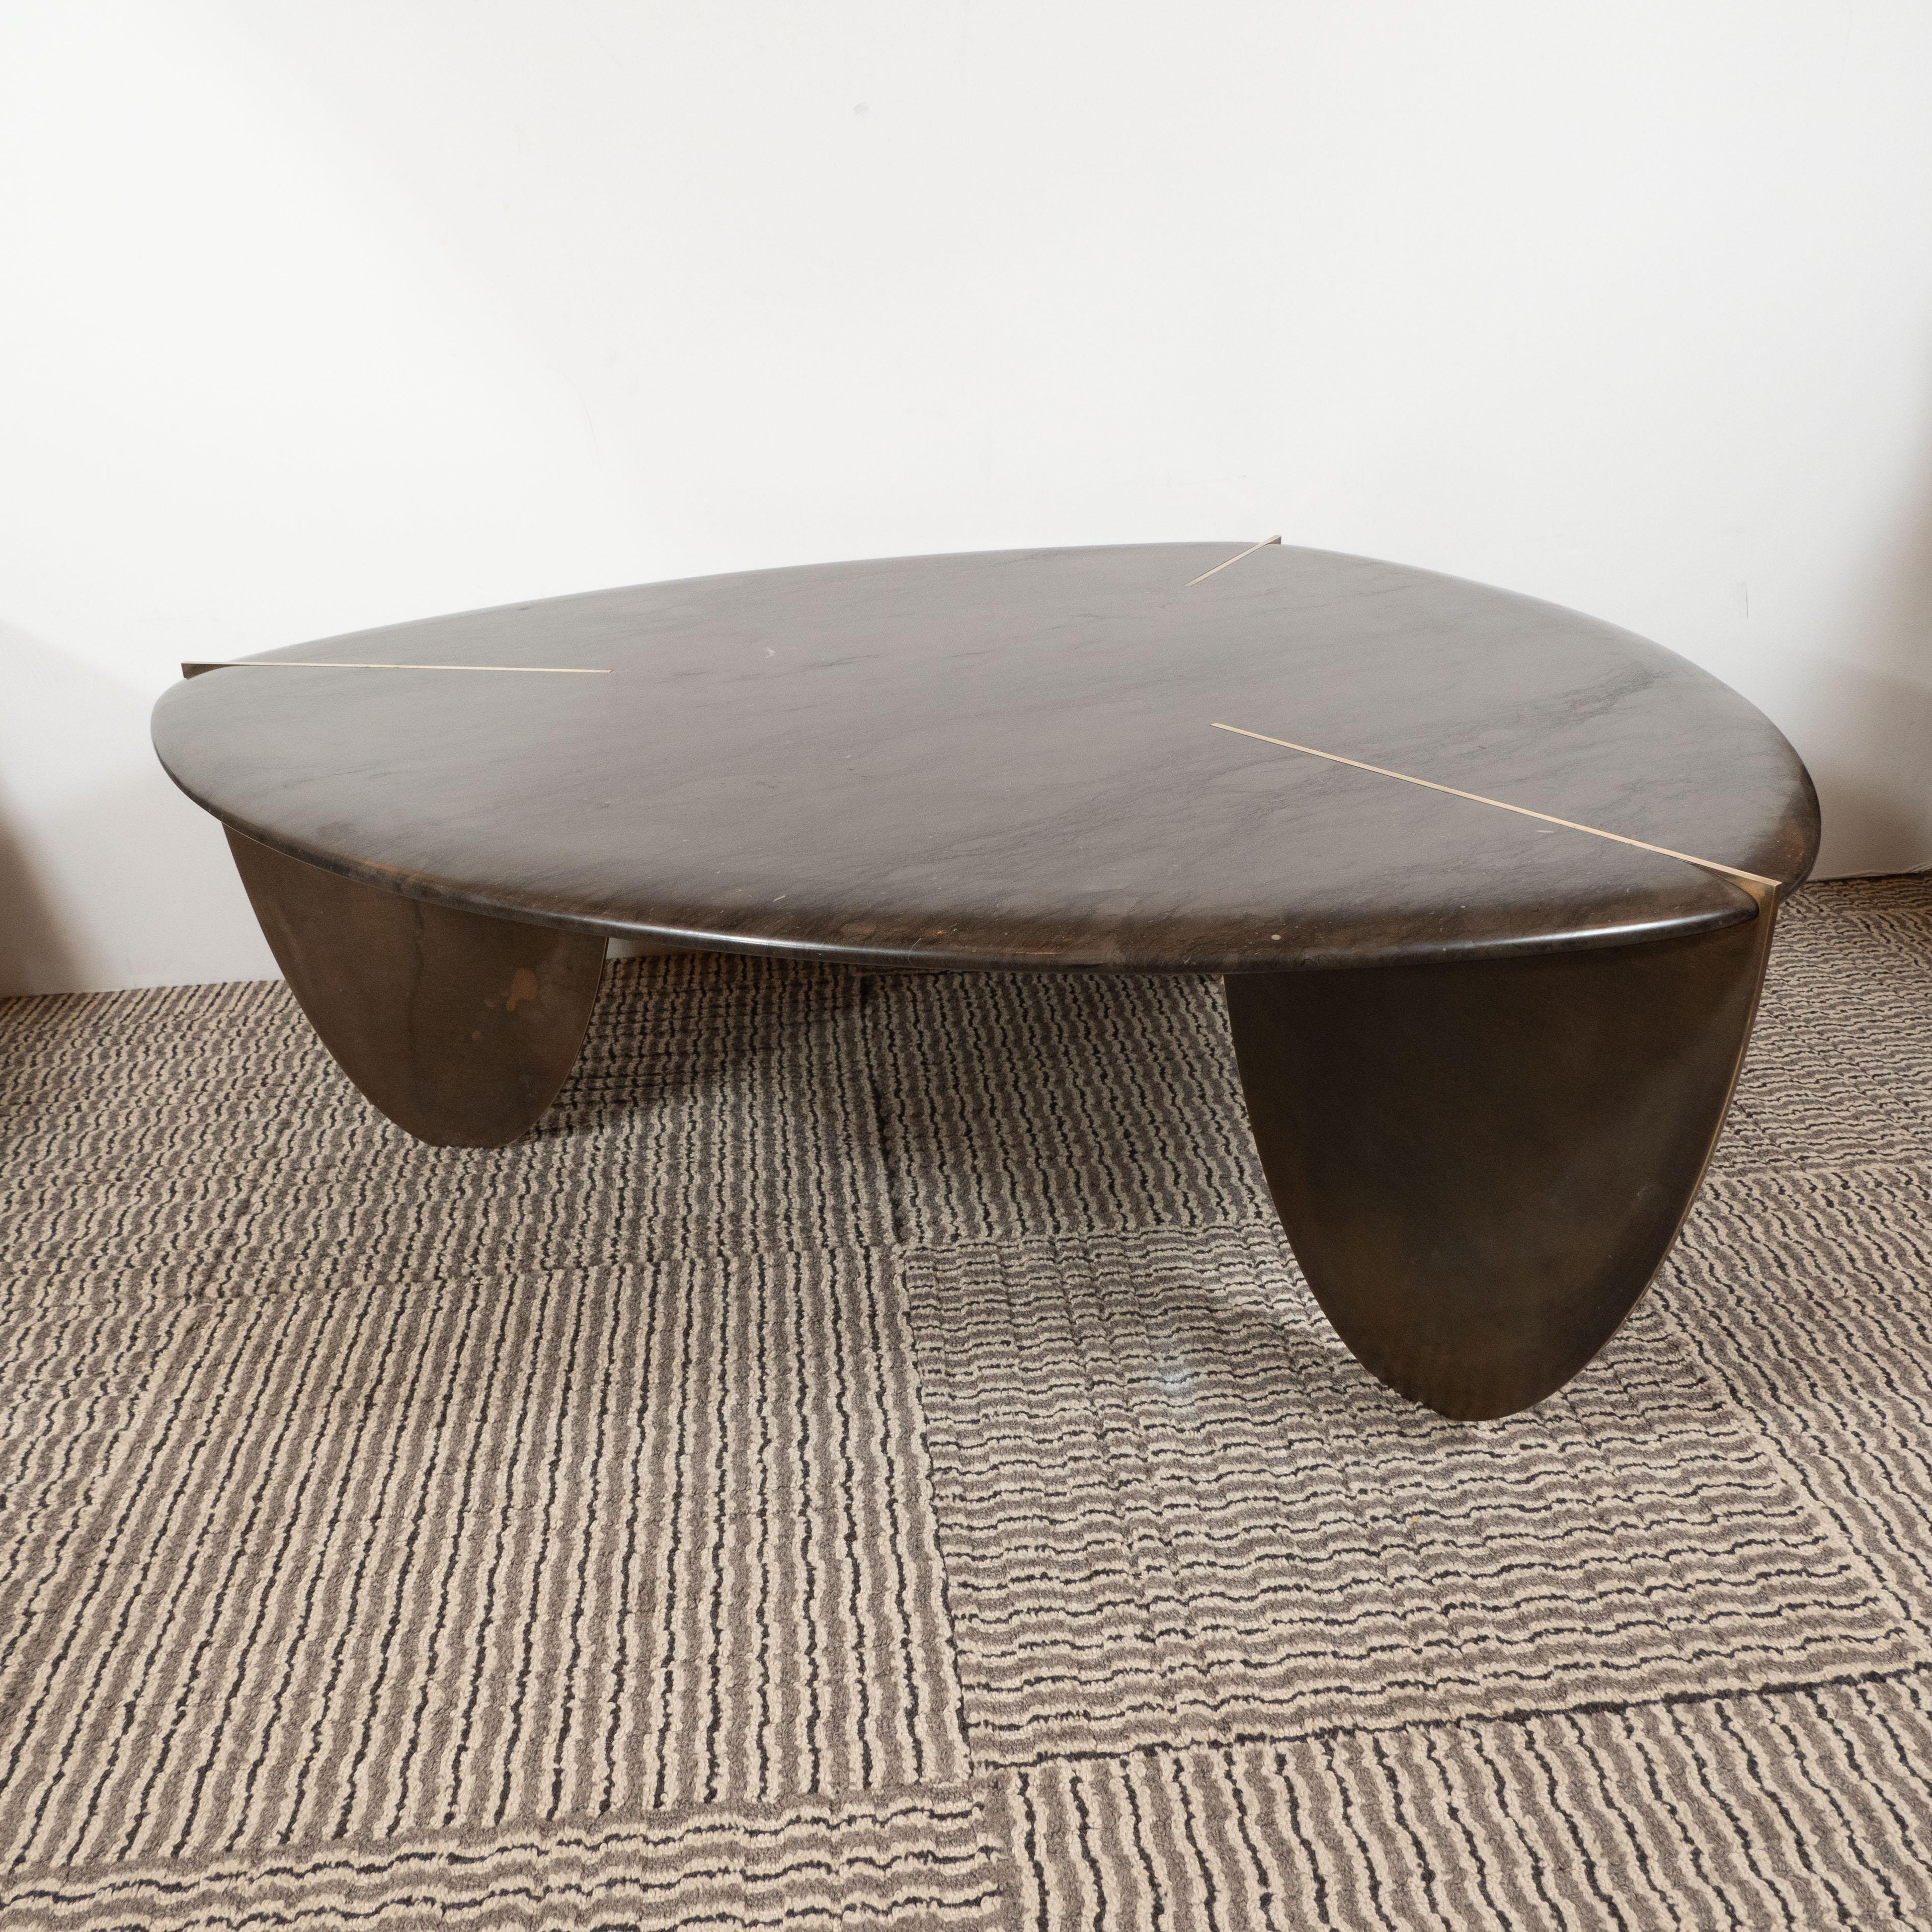 This stunning and refined organic modernist cocktail table was custom designed and fabricated in the United States by hand. It features a shield form in java hued armani marble with bowed sides that comes to three rounded points bisected by